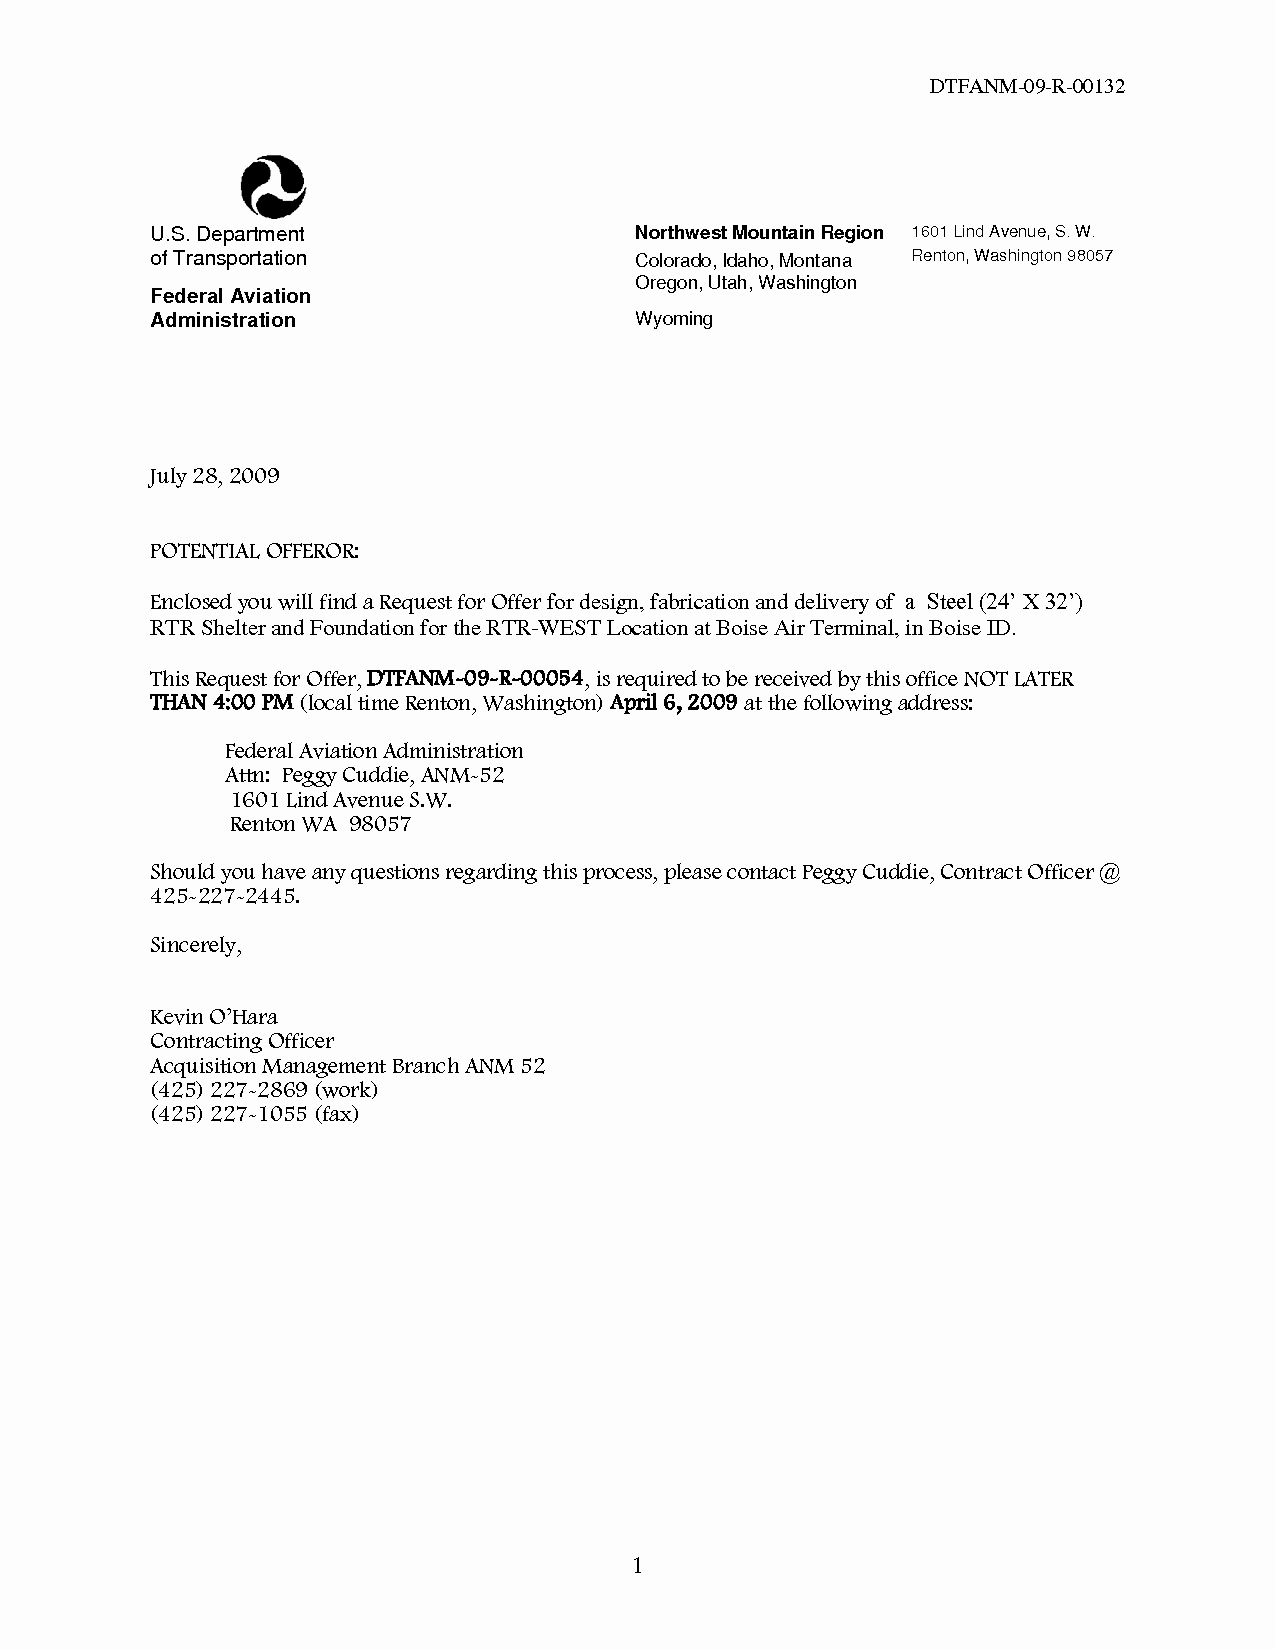 Bank Reference Letter Template Mughals